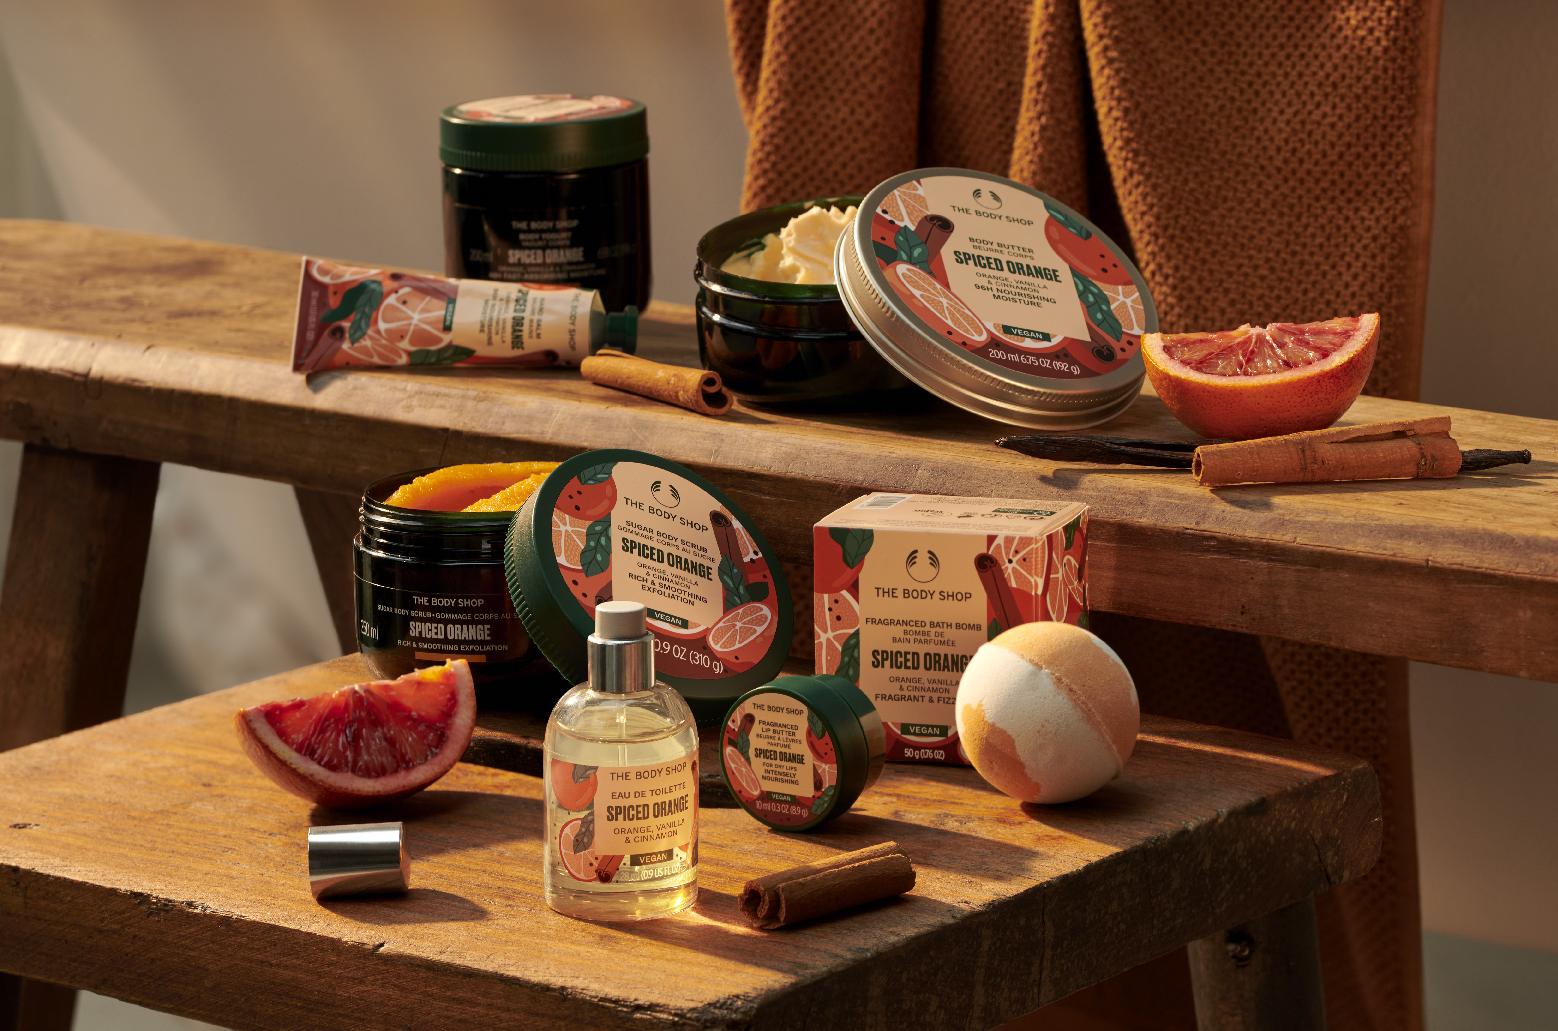  The Body Shop’s iconic Christmas collection is back with 3 new limited-edition ranges - Passionfruit, Wild Pine, and Spiced Orange